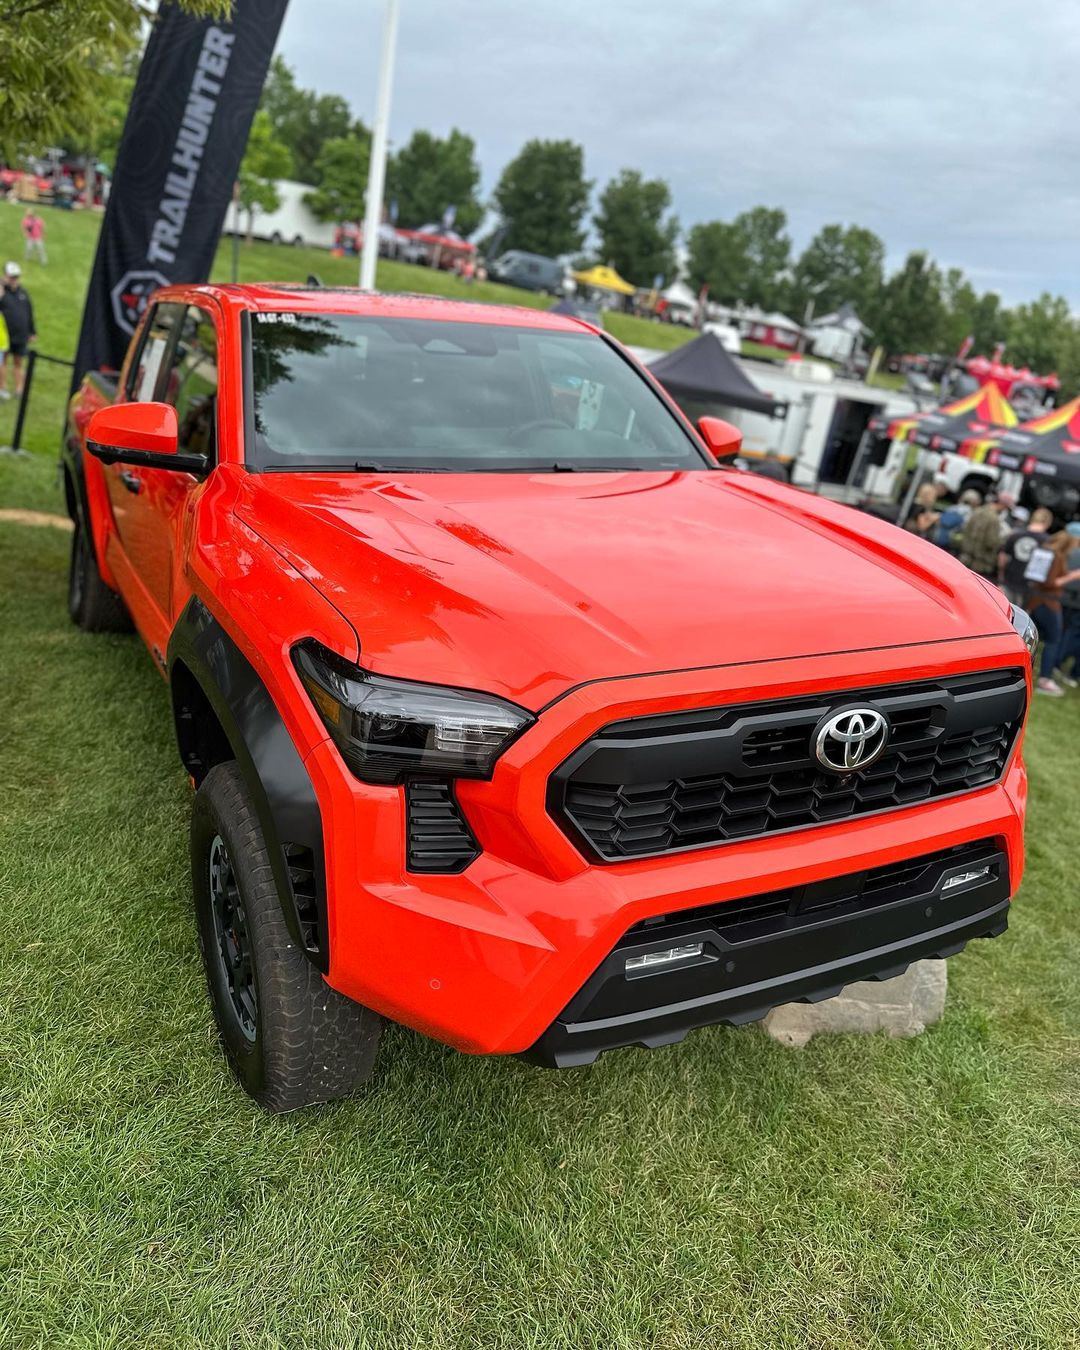 2024 Tacoma 2024 Tacoma TRD Off-Road has first official public reveal @ Overland Expo! [Videos + Photos] Solar Octane 2024 Tacoma TRD Off-Road